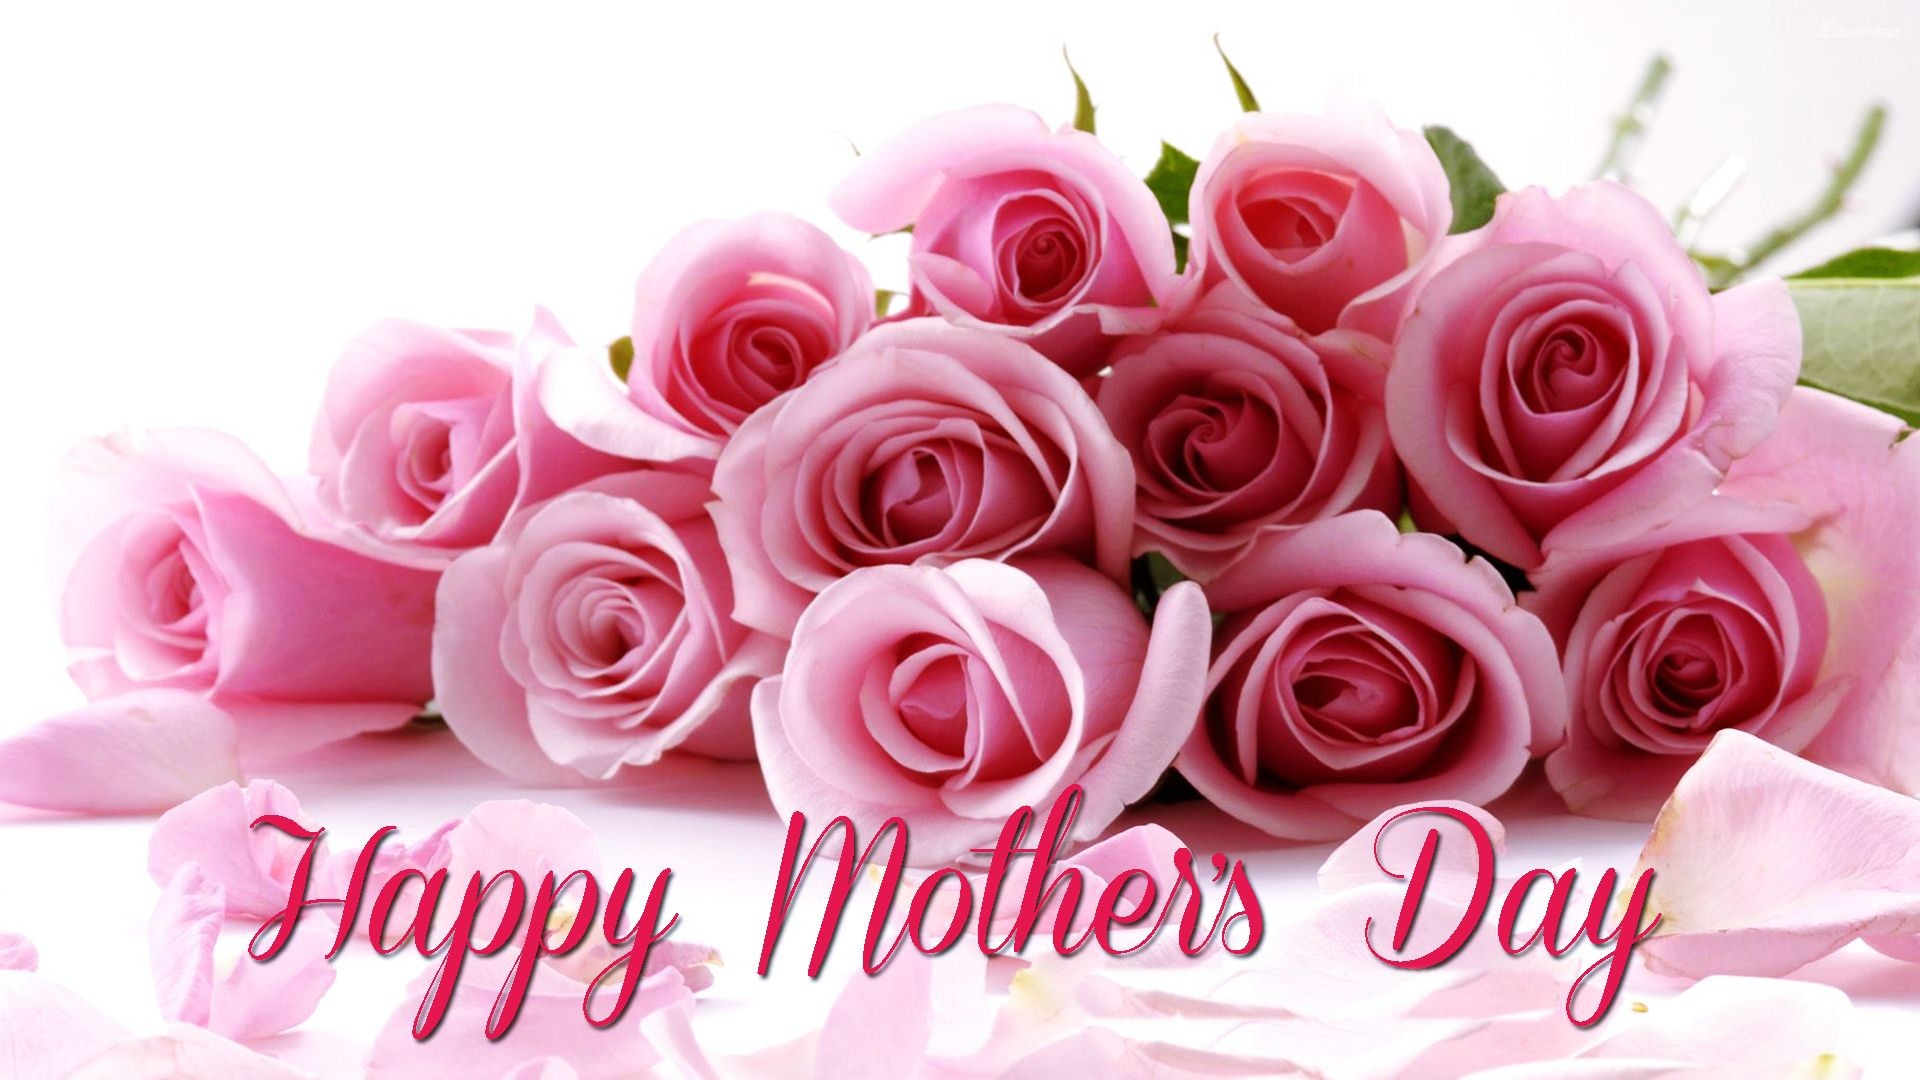 1920x1080 Mothers day wallpaper images.